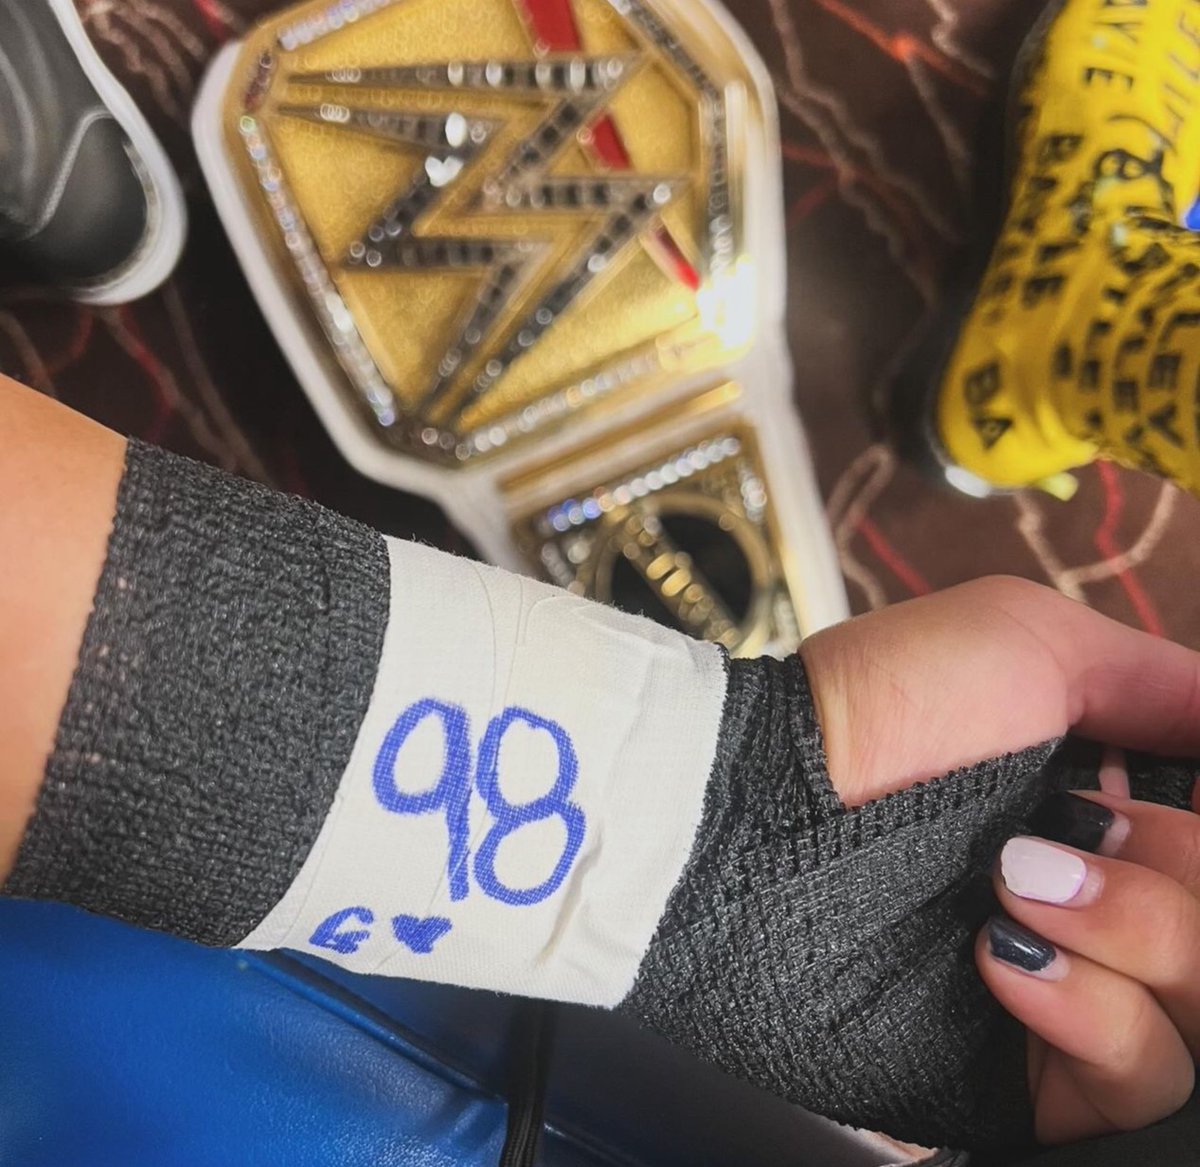 Bayley wrestled with “98 G” on her tape in celebration of grandma’s life ❤️

She was 98 years old